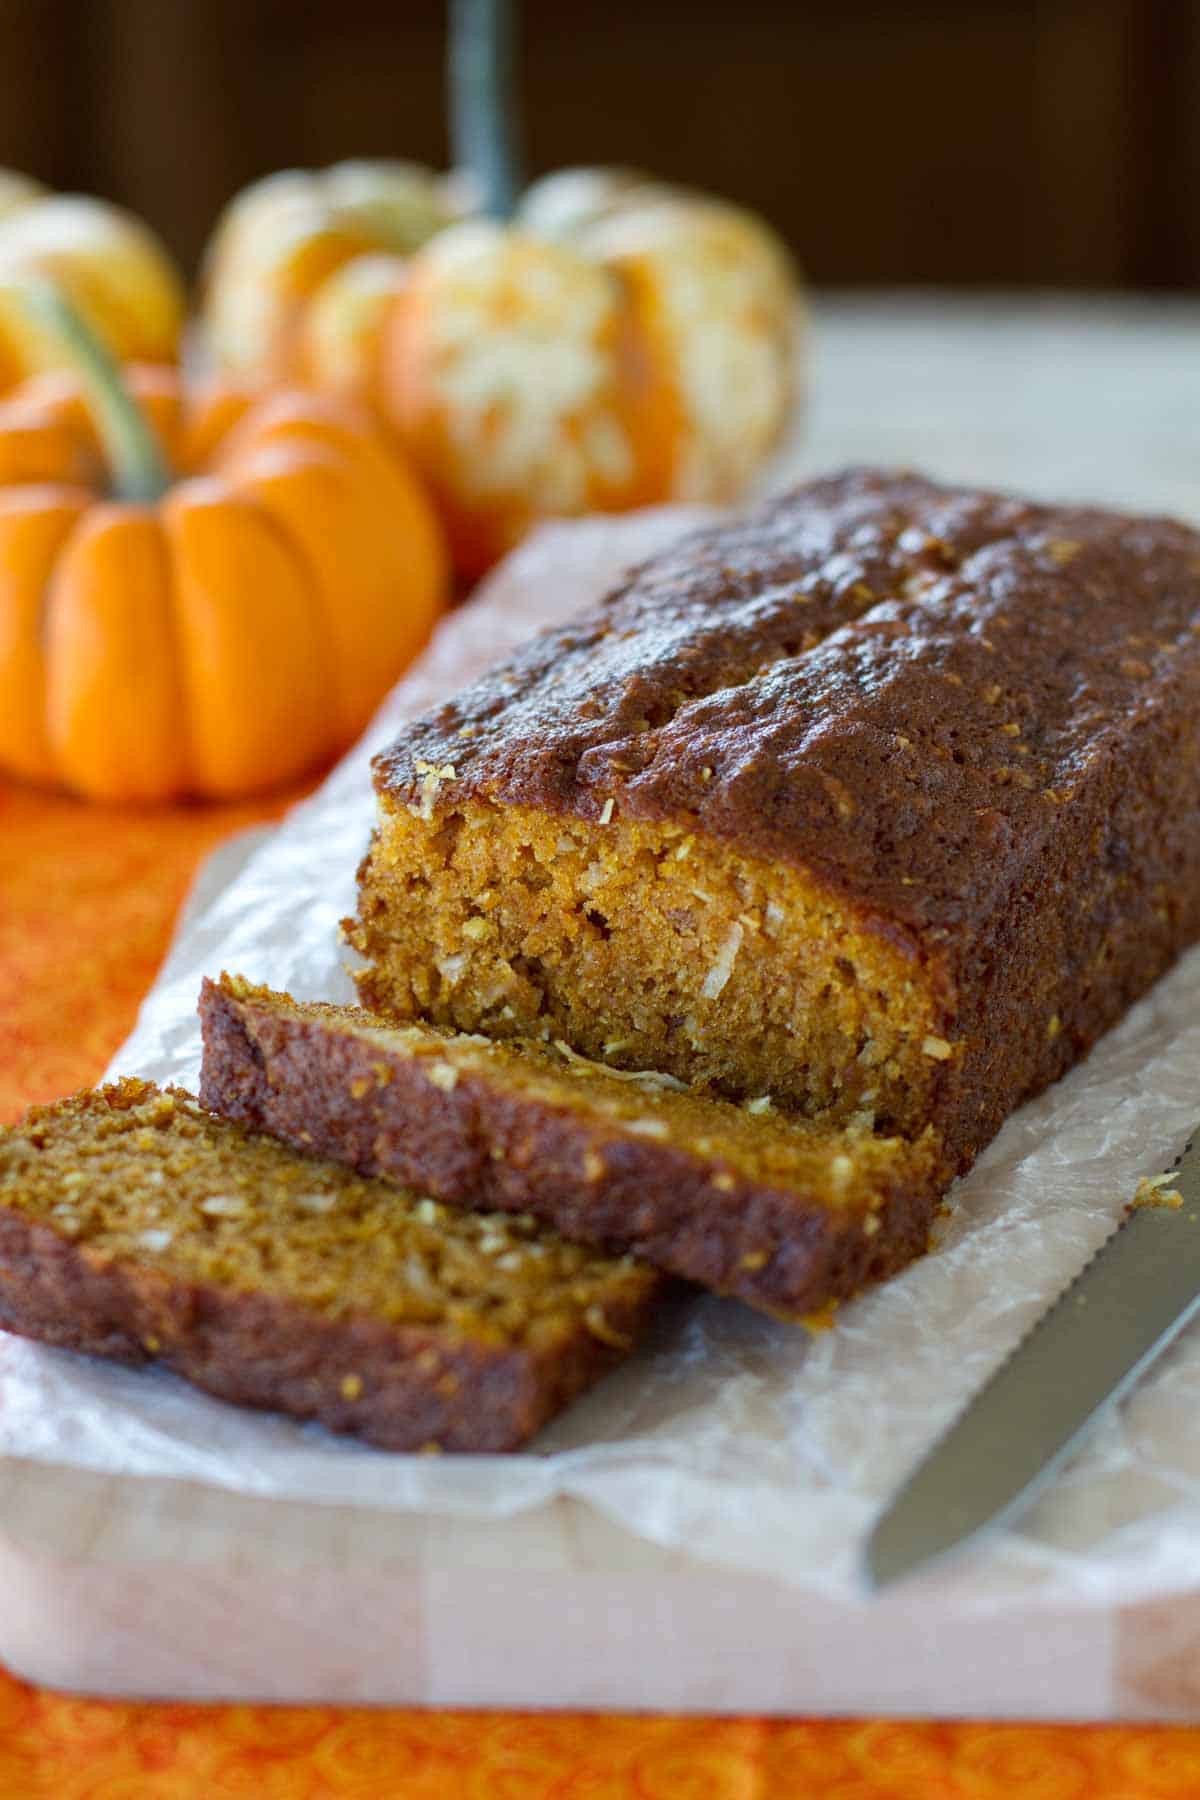 Loaf of pumpkin coconut bread with a few slices cut from it.